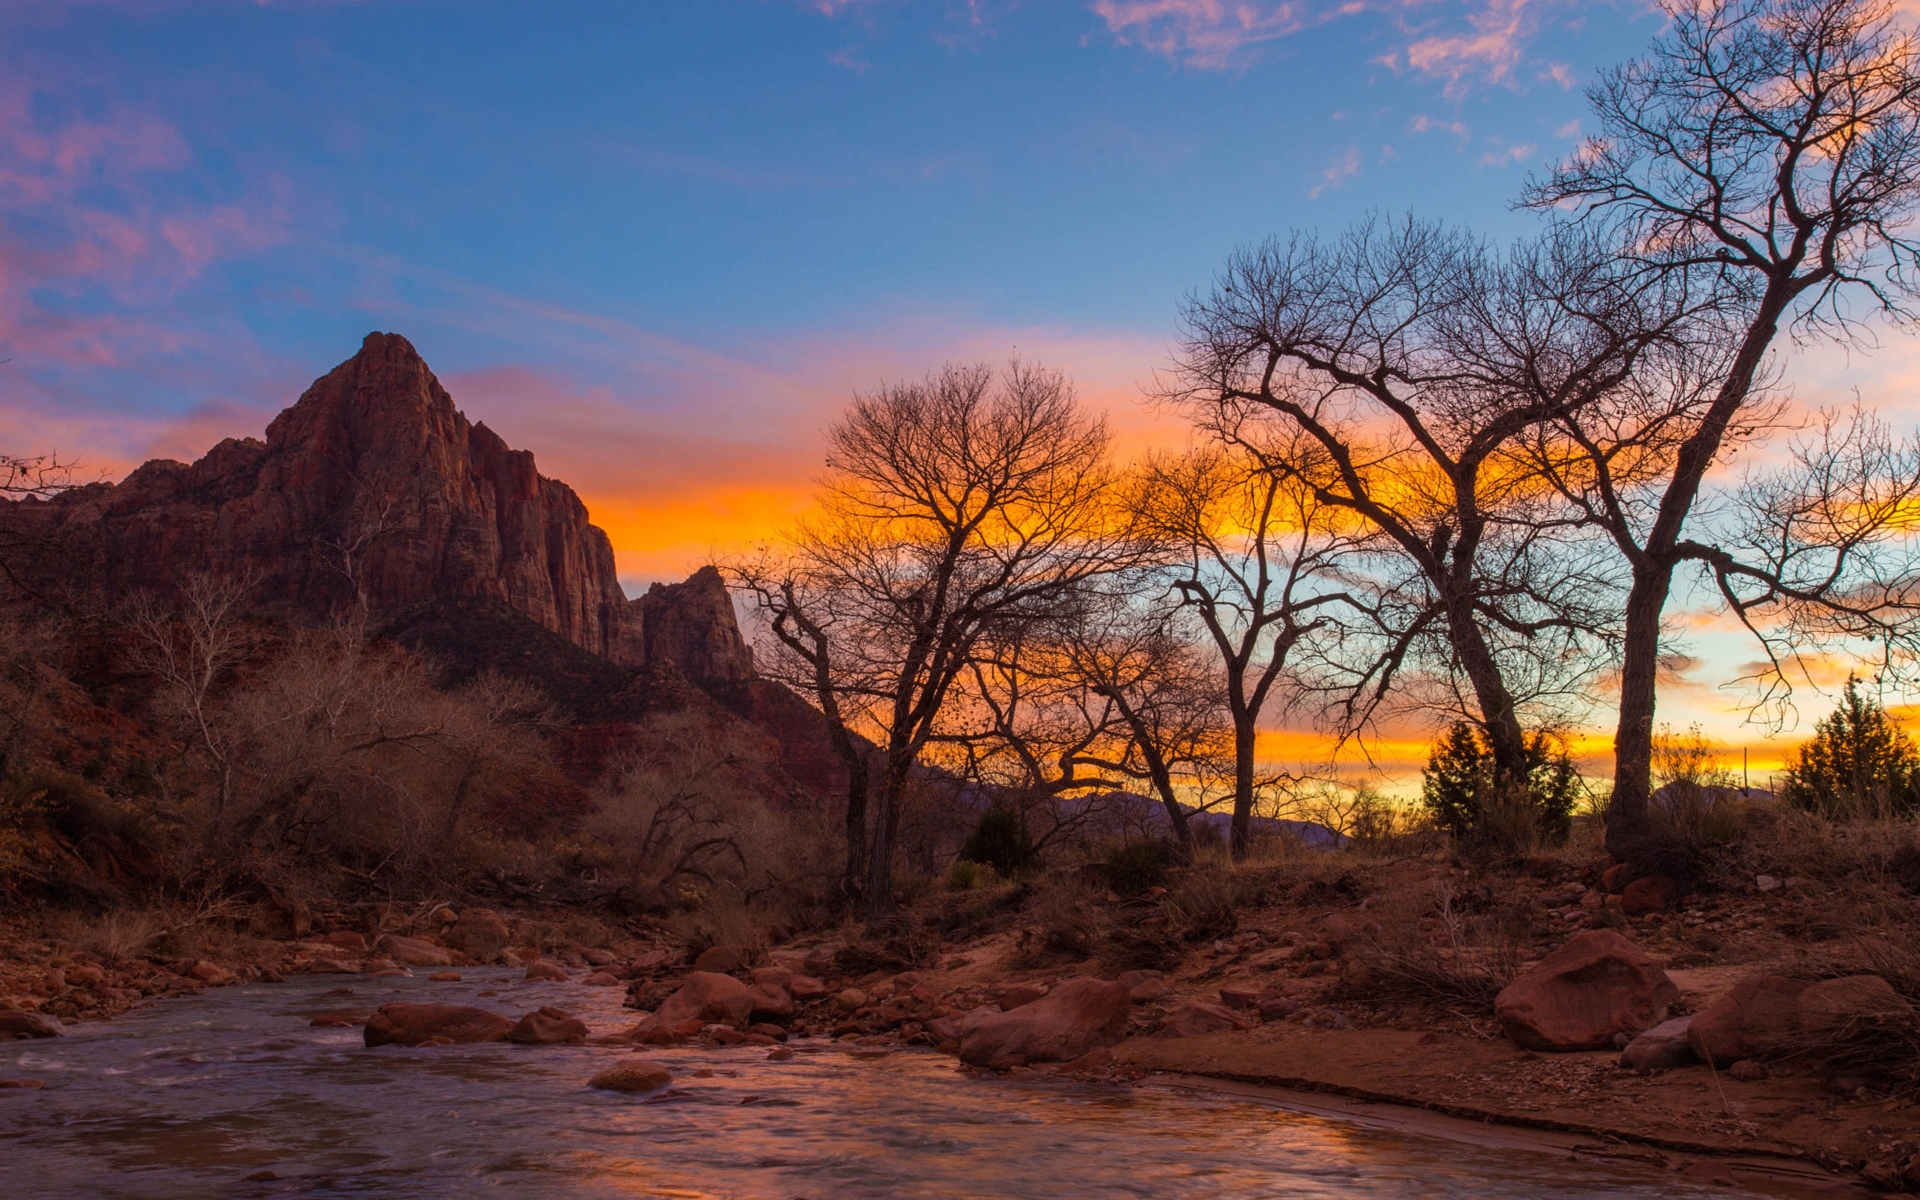 earth, zion national park, mountain, nature, sky, sunset, tree, usa, water, national park